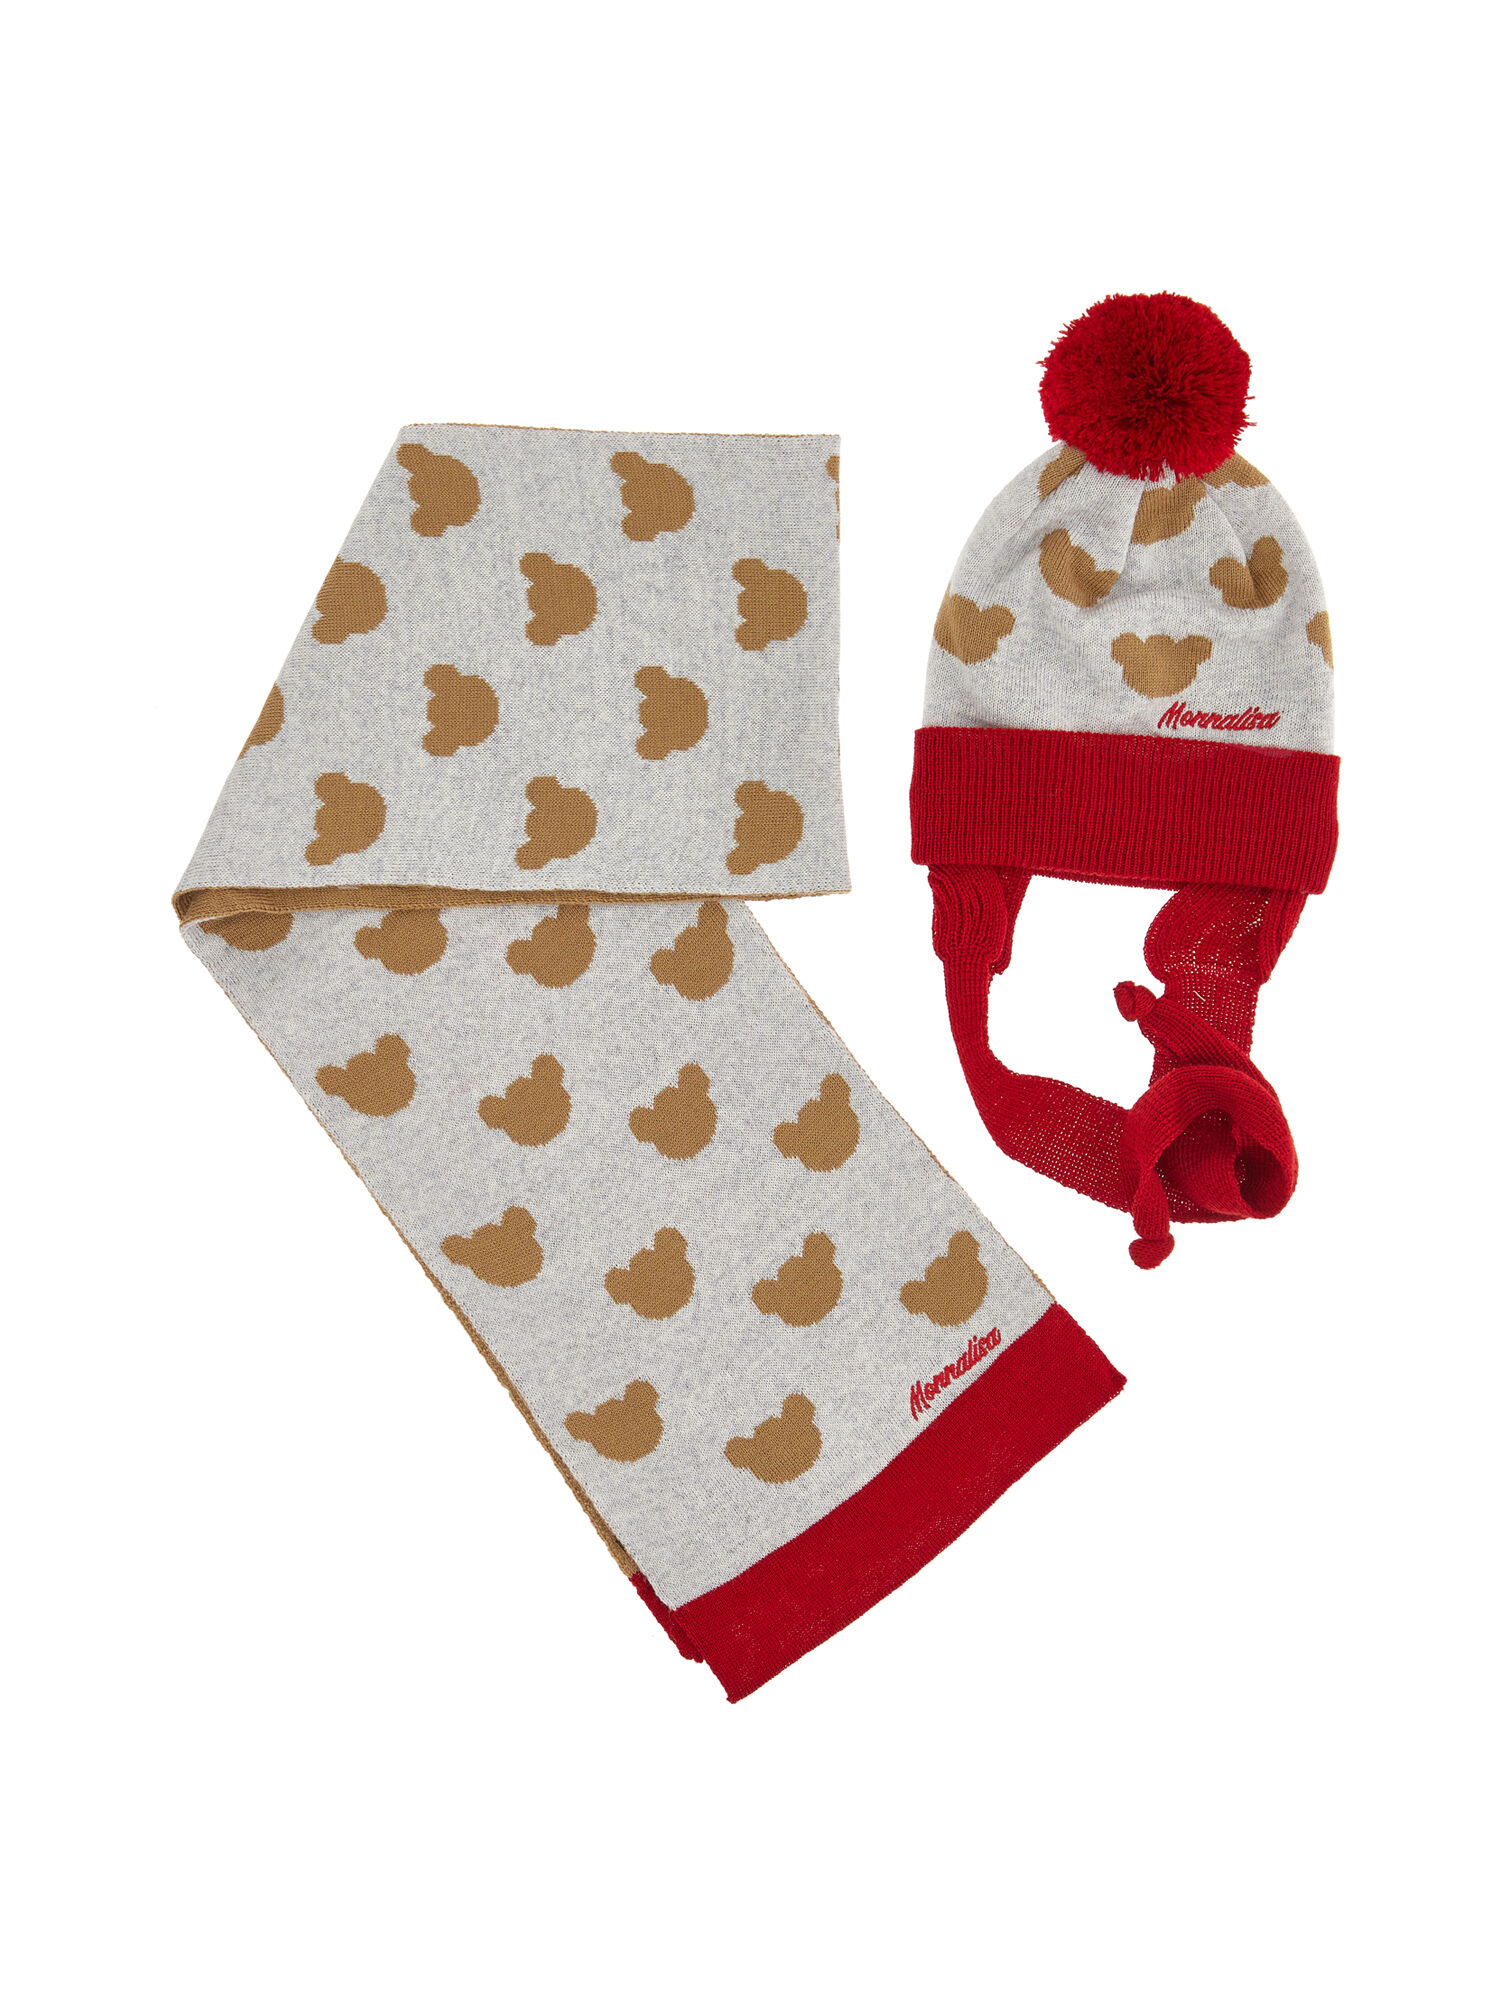 Teddy hat and scarf set Monnalisa Boys Accessories Scarves 